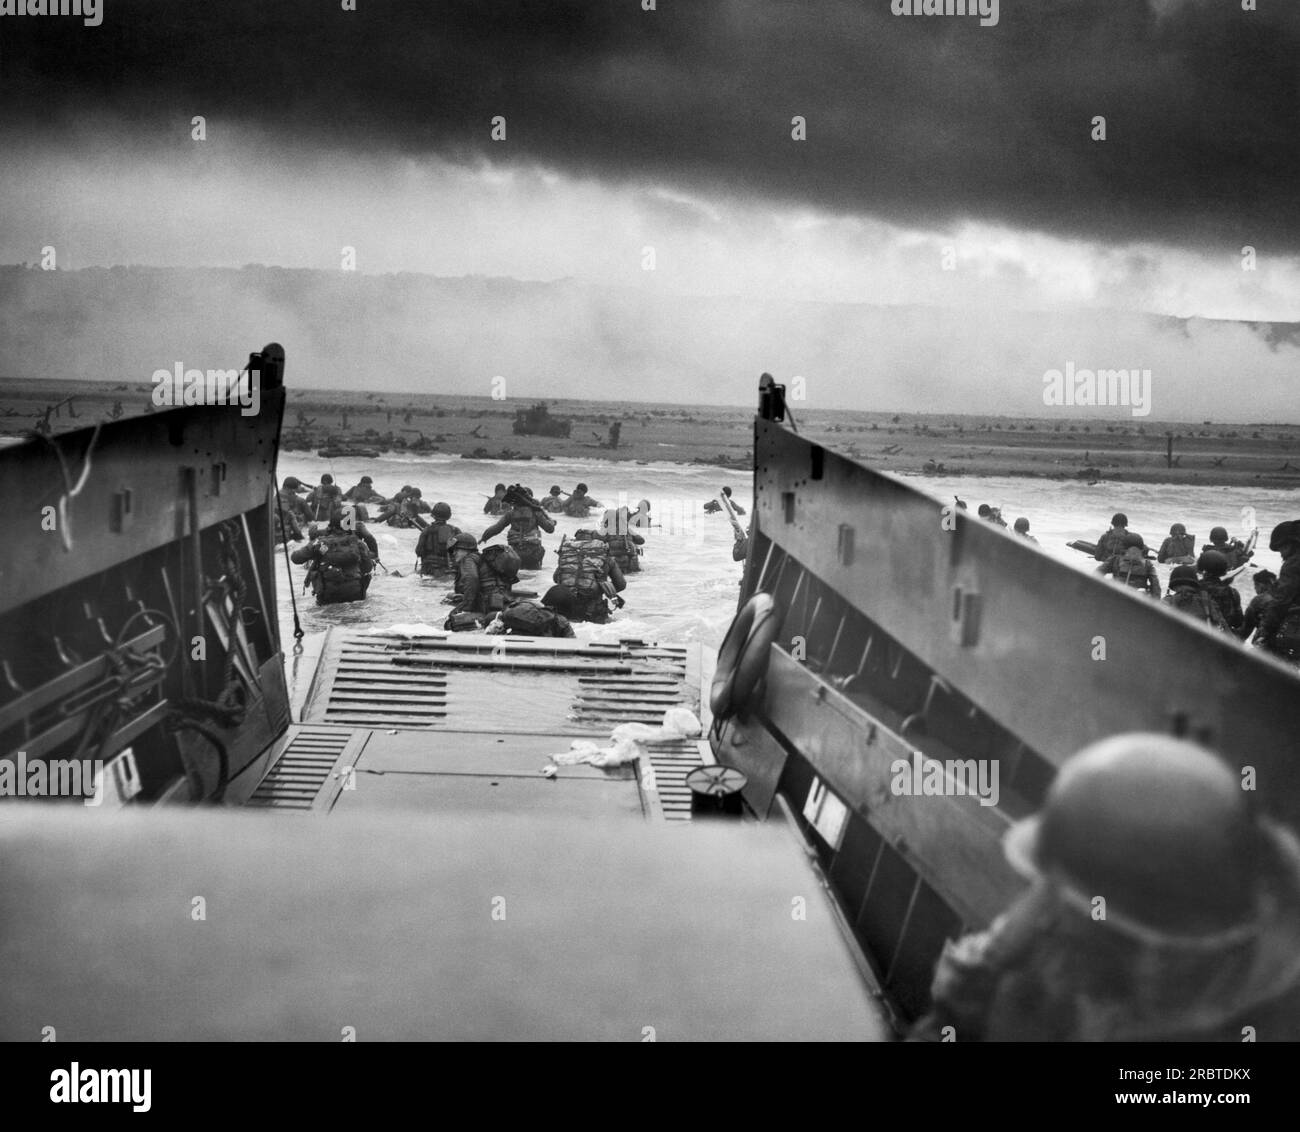 Normandy, France:   June 6, 1944  A Landing Craft Vehicle, Personnel, (LCVP), the USS Samuel Chase, disembarks troops of Company E, 16th Infantry, 1st Infantry Division (the Big Red One) onto the Fox Green section of Omaha Beach on the morning of D-Day. The American soldiers encountered withering machine gun fire from the German 352nd Division while wading ashore. During the initial landing, two-thirds of Company E became casualties. Photo by Robert Sargent, U.S. Coast Guard. Stock Photo